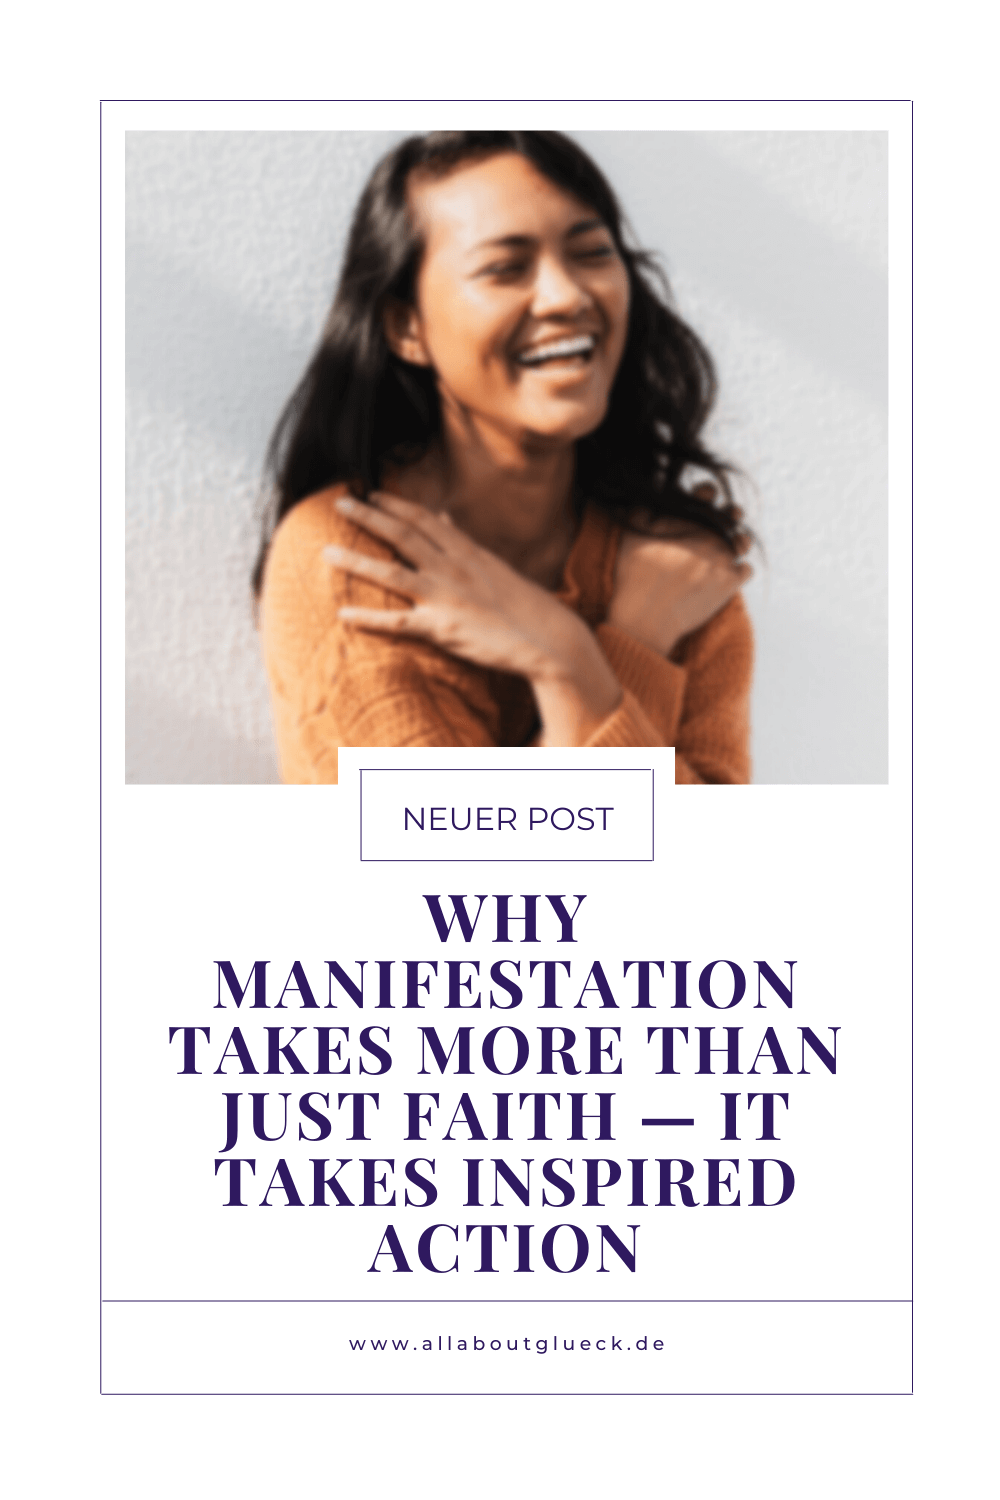 Manifesting Step by Step: Why You Need More Than Just Belief—The Guide to Inspired Action